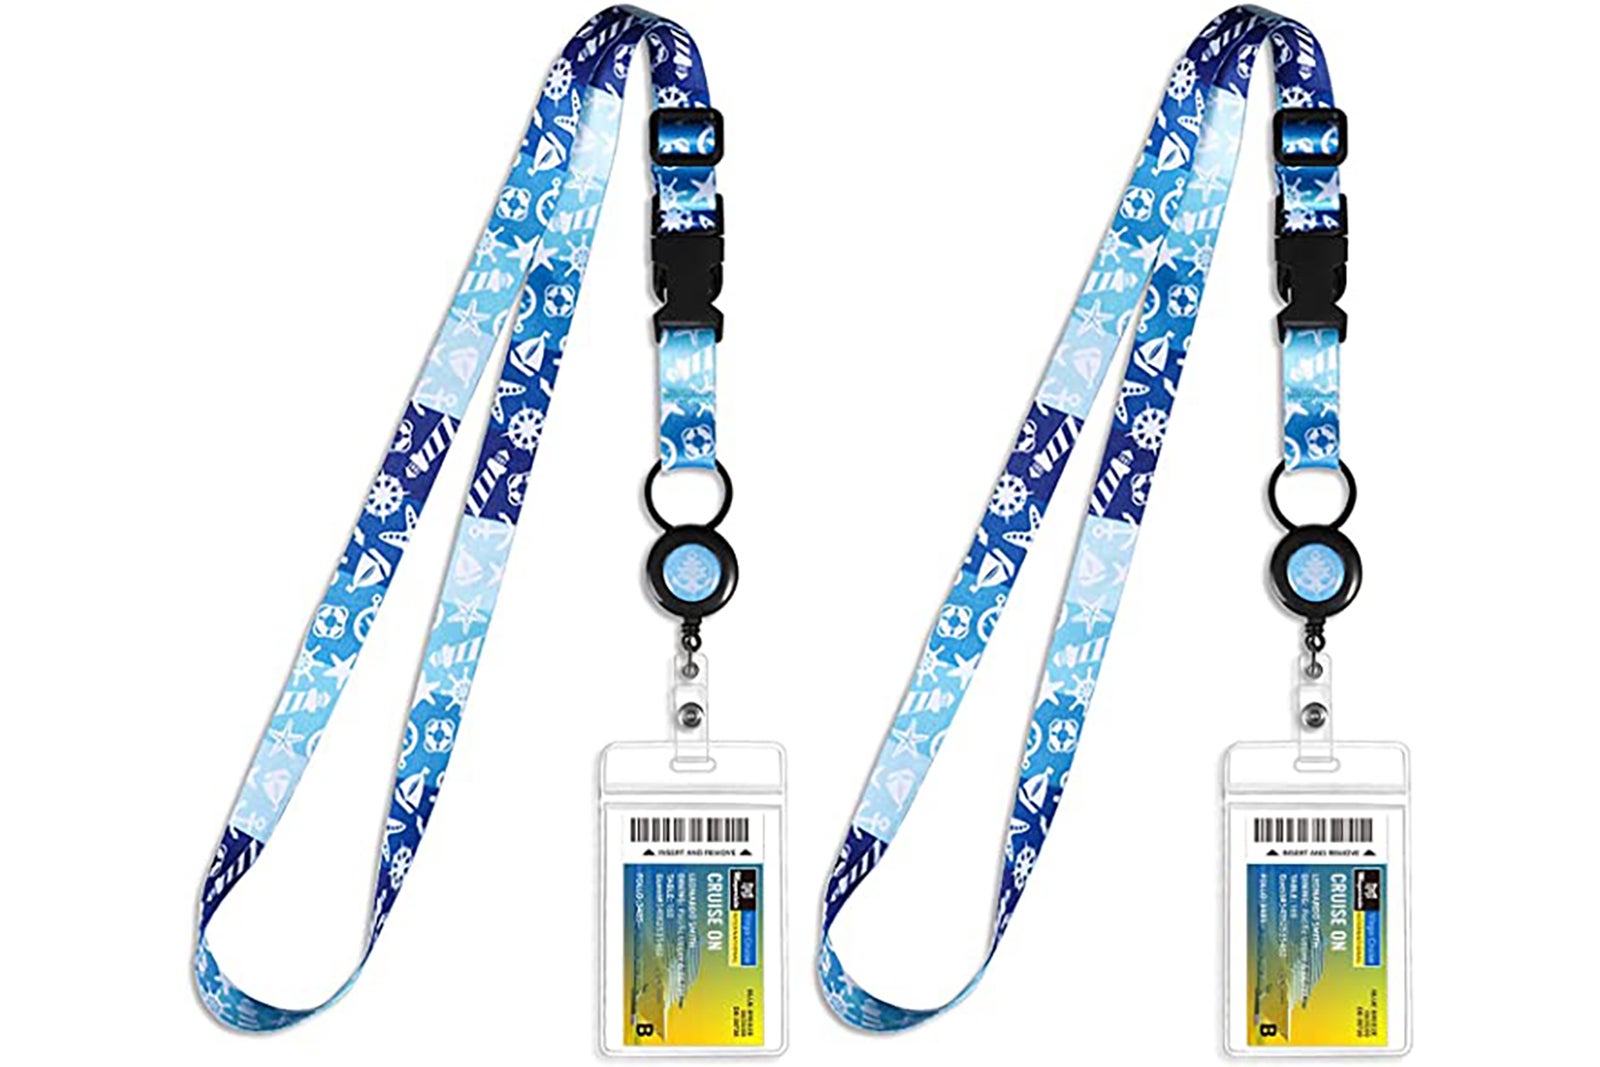 ID Badge Holder with Lanyard Strap for PU Leather ID Card Holders Orange Lanyards Straps for Keys Kid Women Men USB -2-Sided Vertical Badges Holders 1